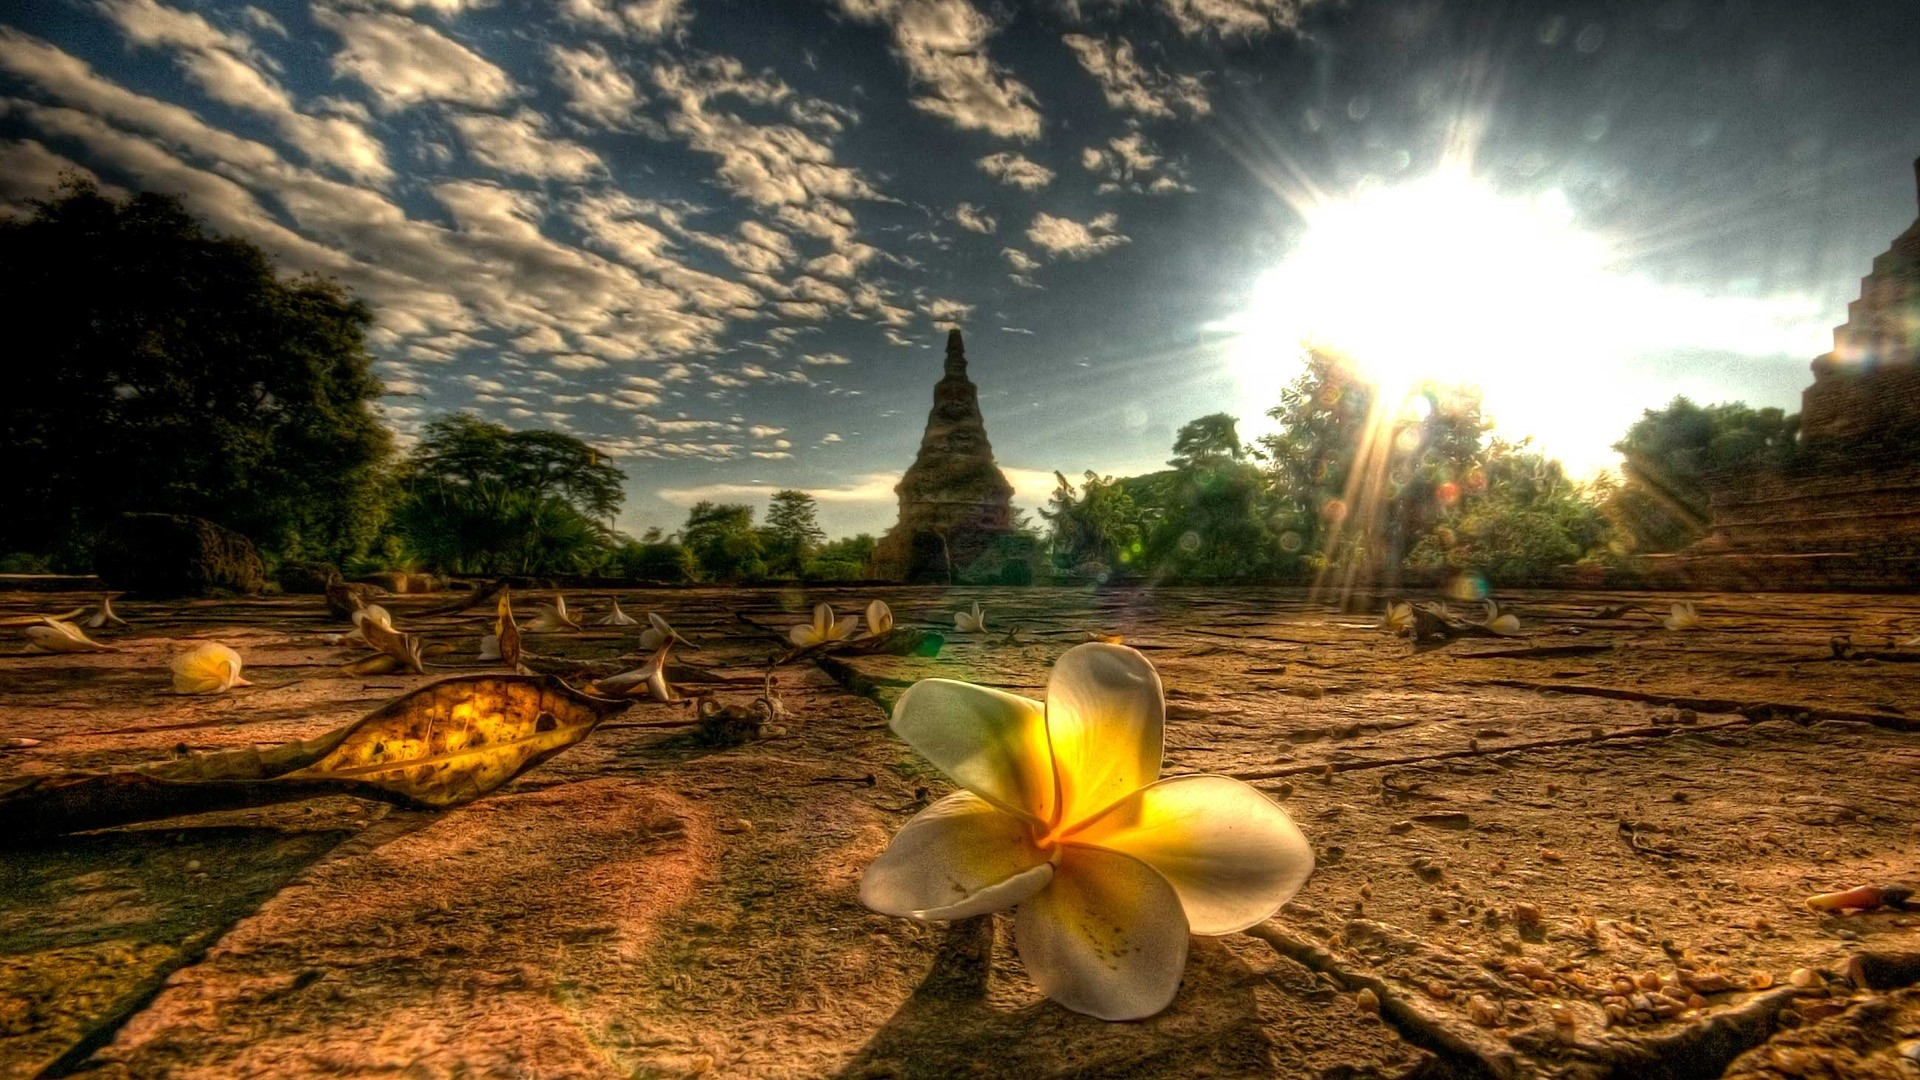 Thailand wallpapers best wallpapers